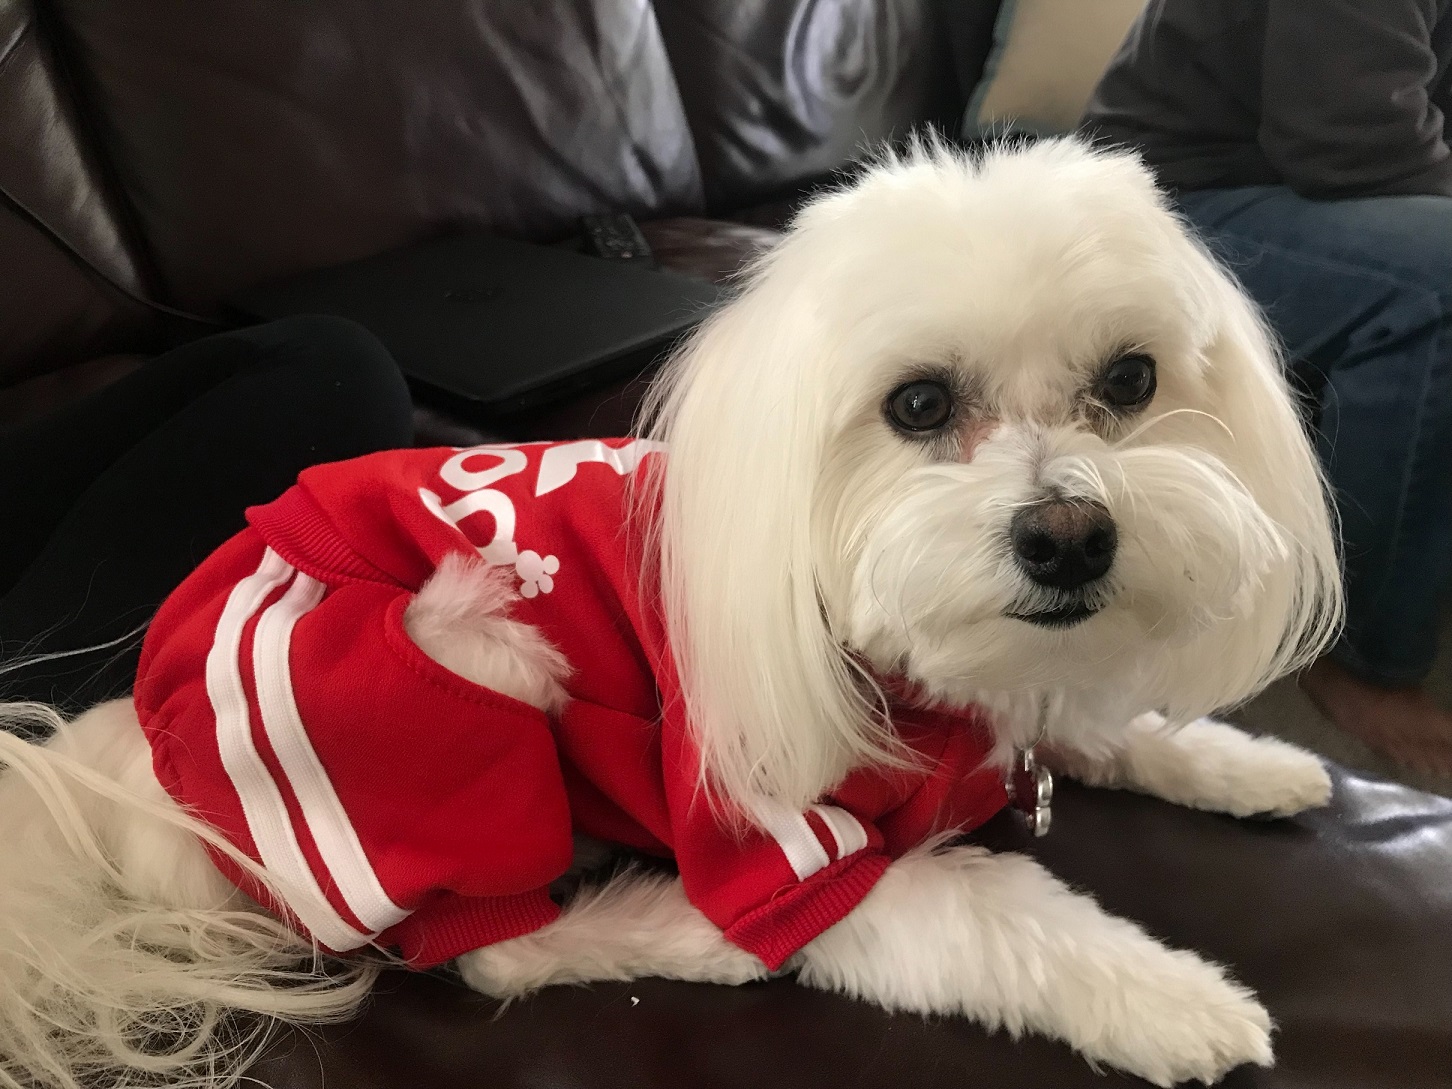 a white dog wearing red clothing